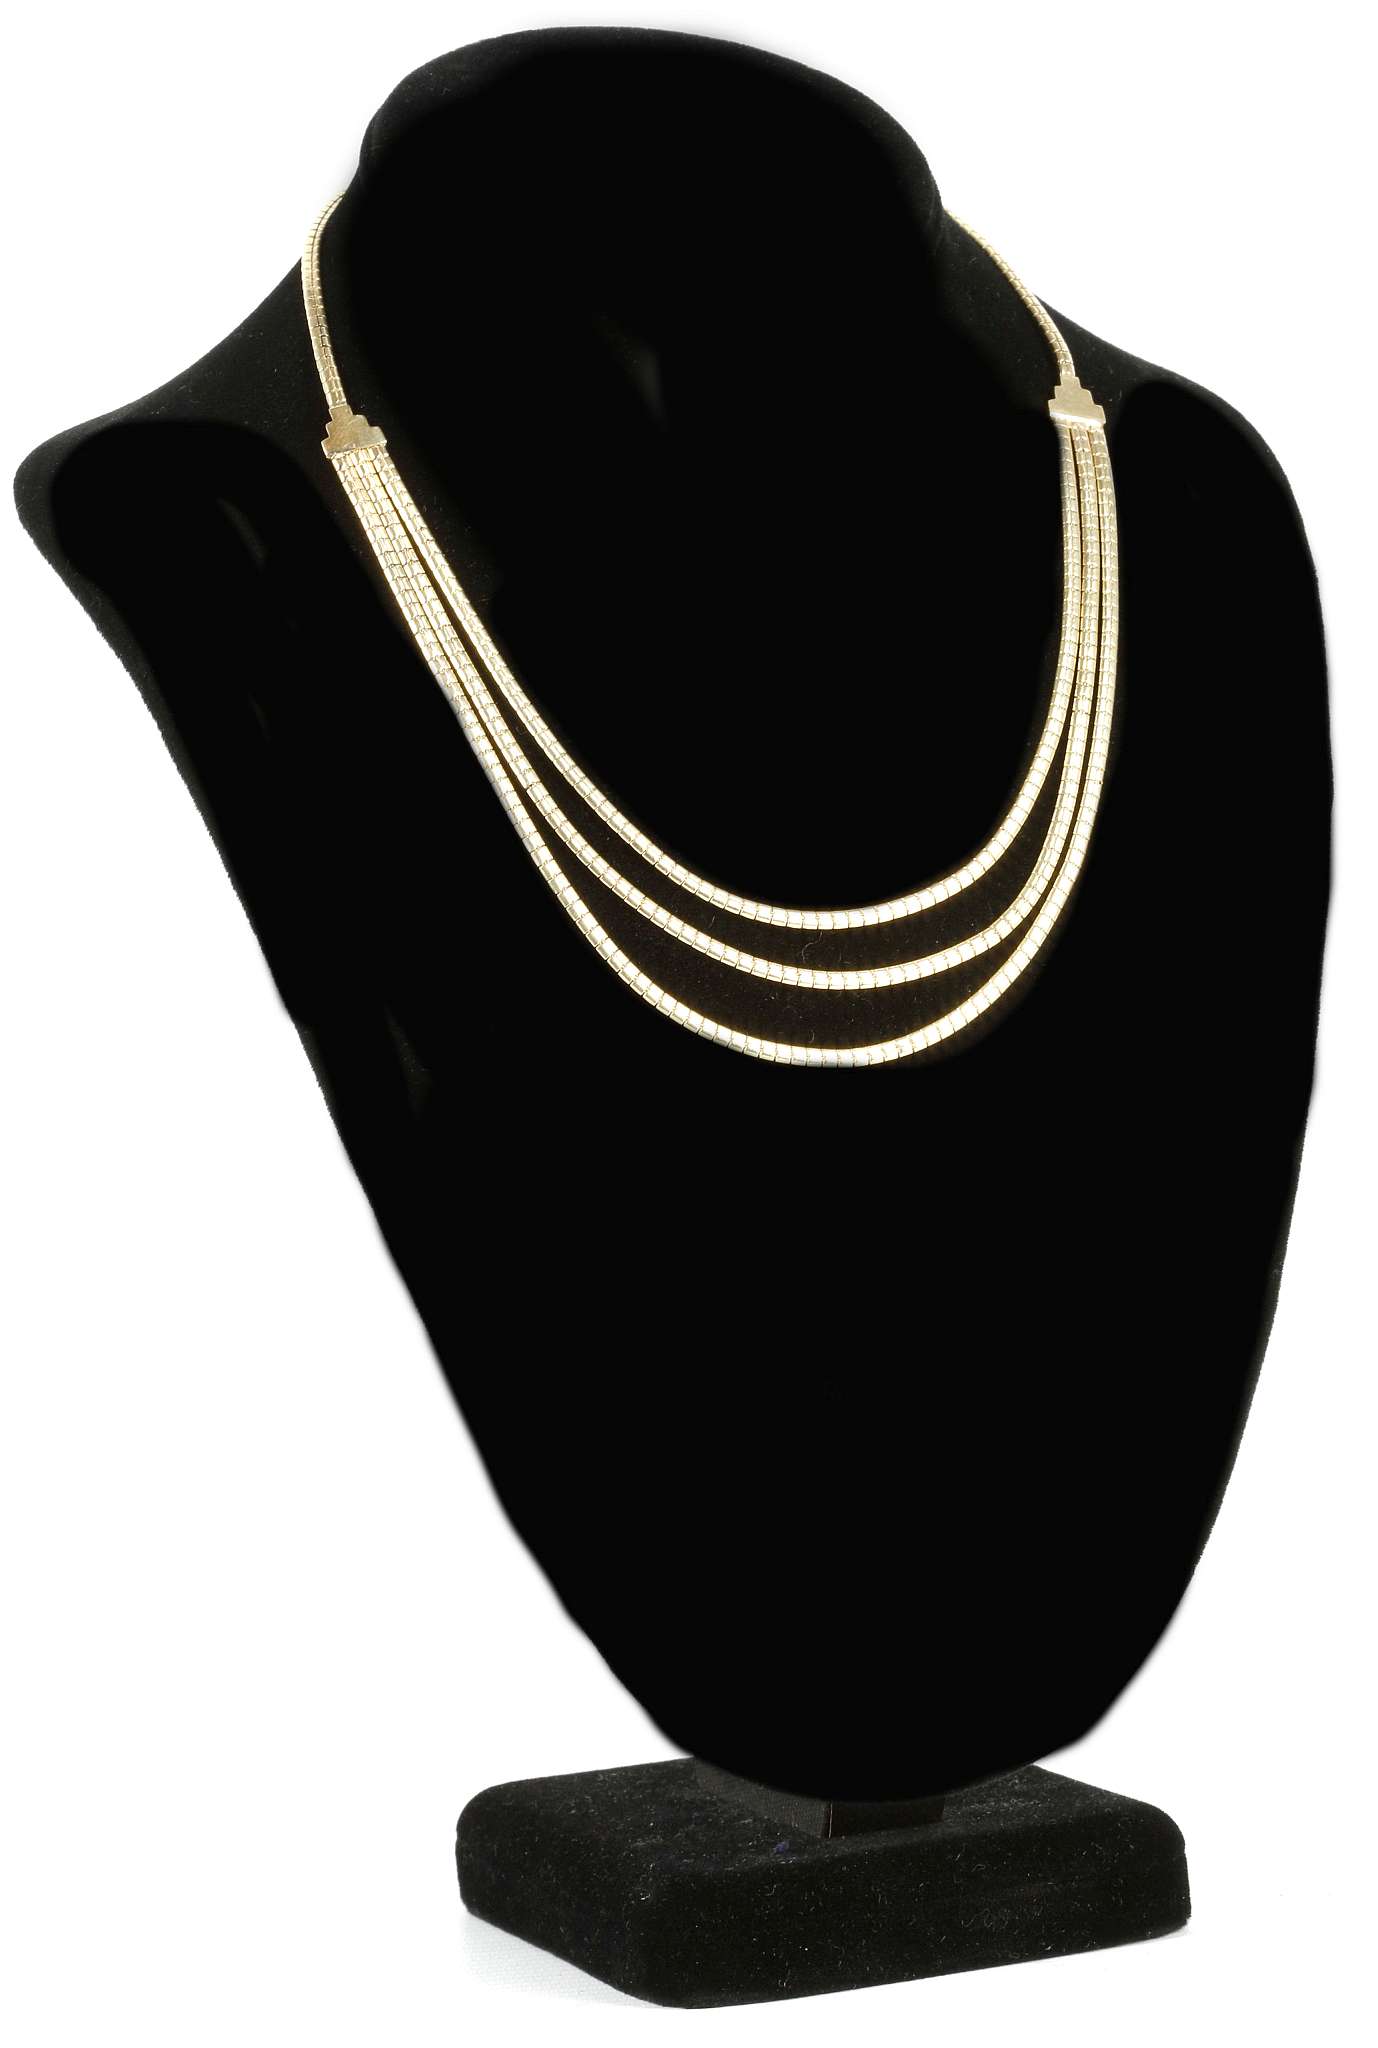 A 14k articulated necklace, with textured finish a - Image 2 of 3